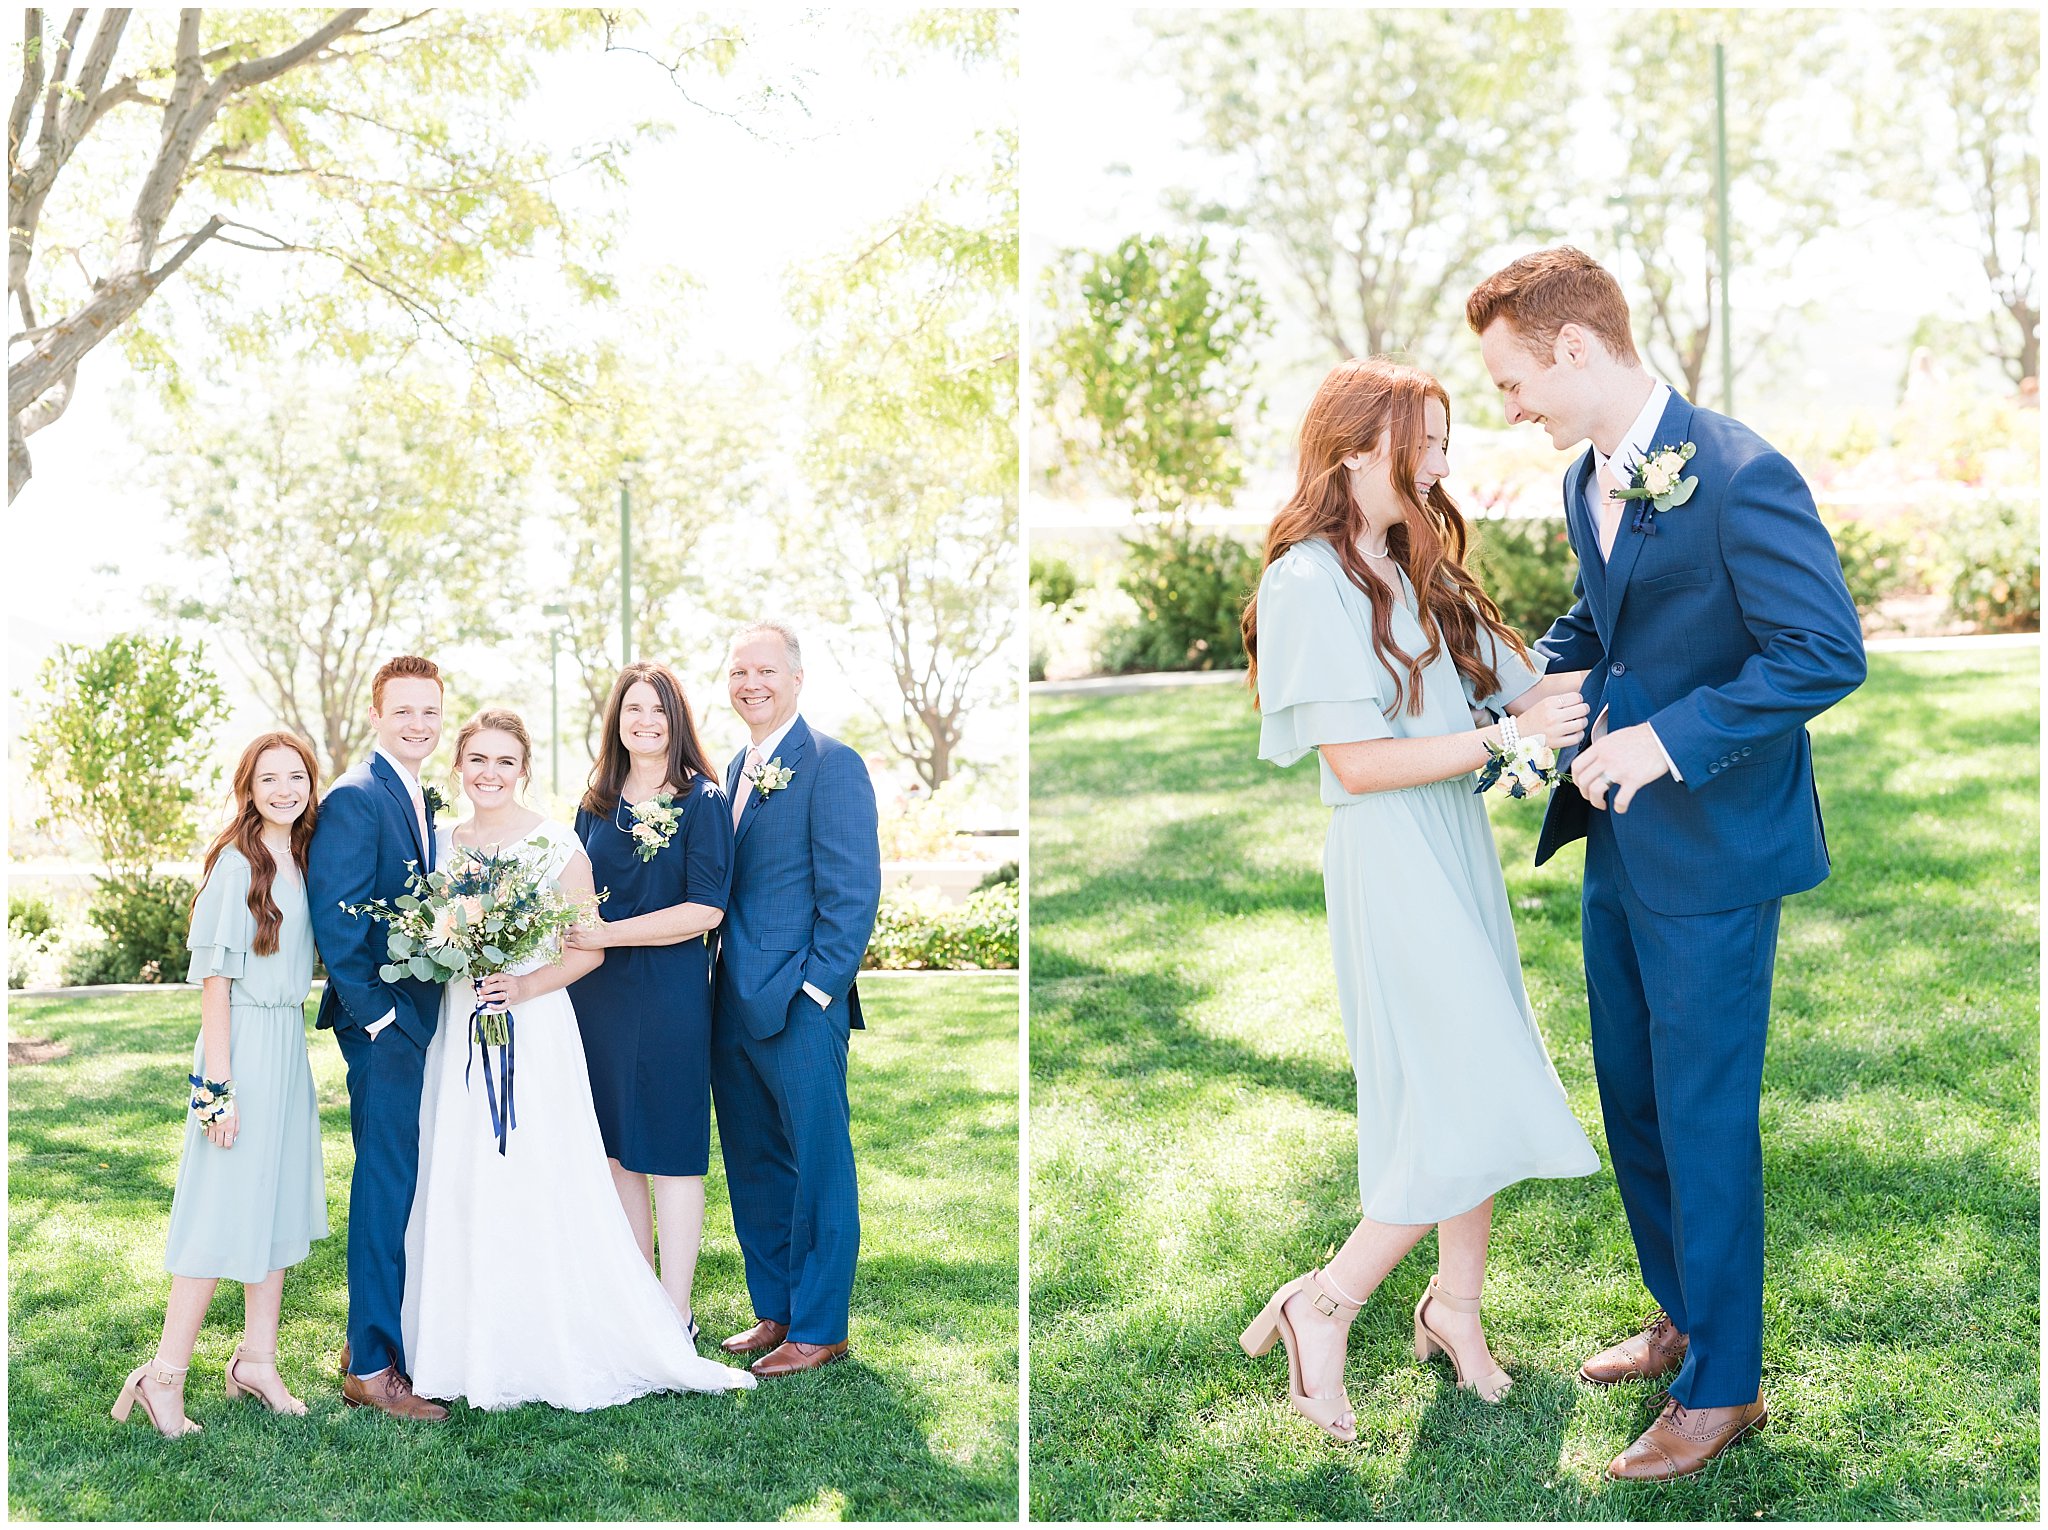 Family portraits at the temple | Bountiful Temple Wedding and Oak Hills Reception | Jessie and Dallin Photography